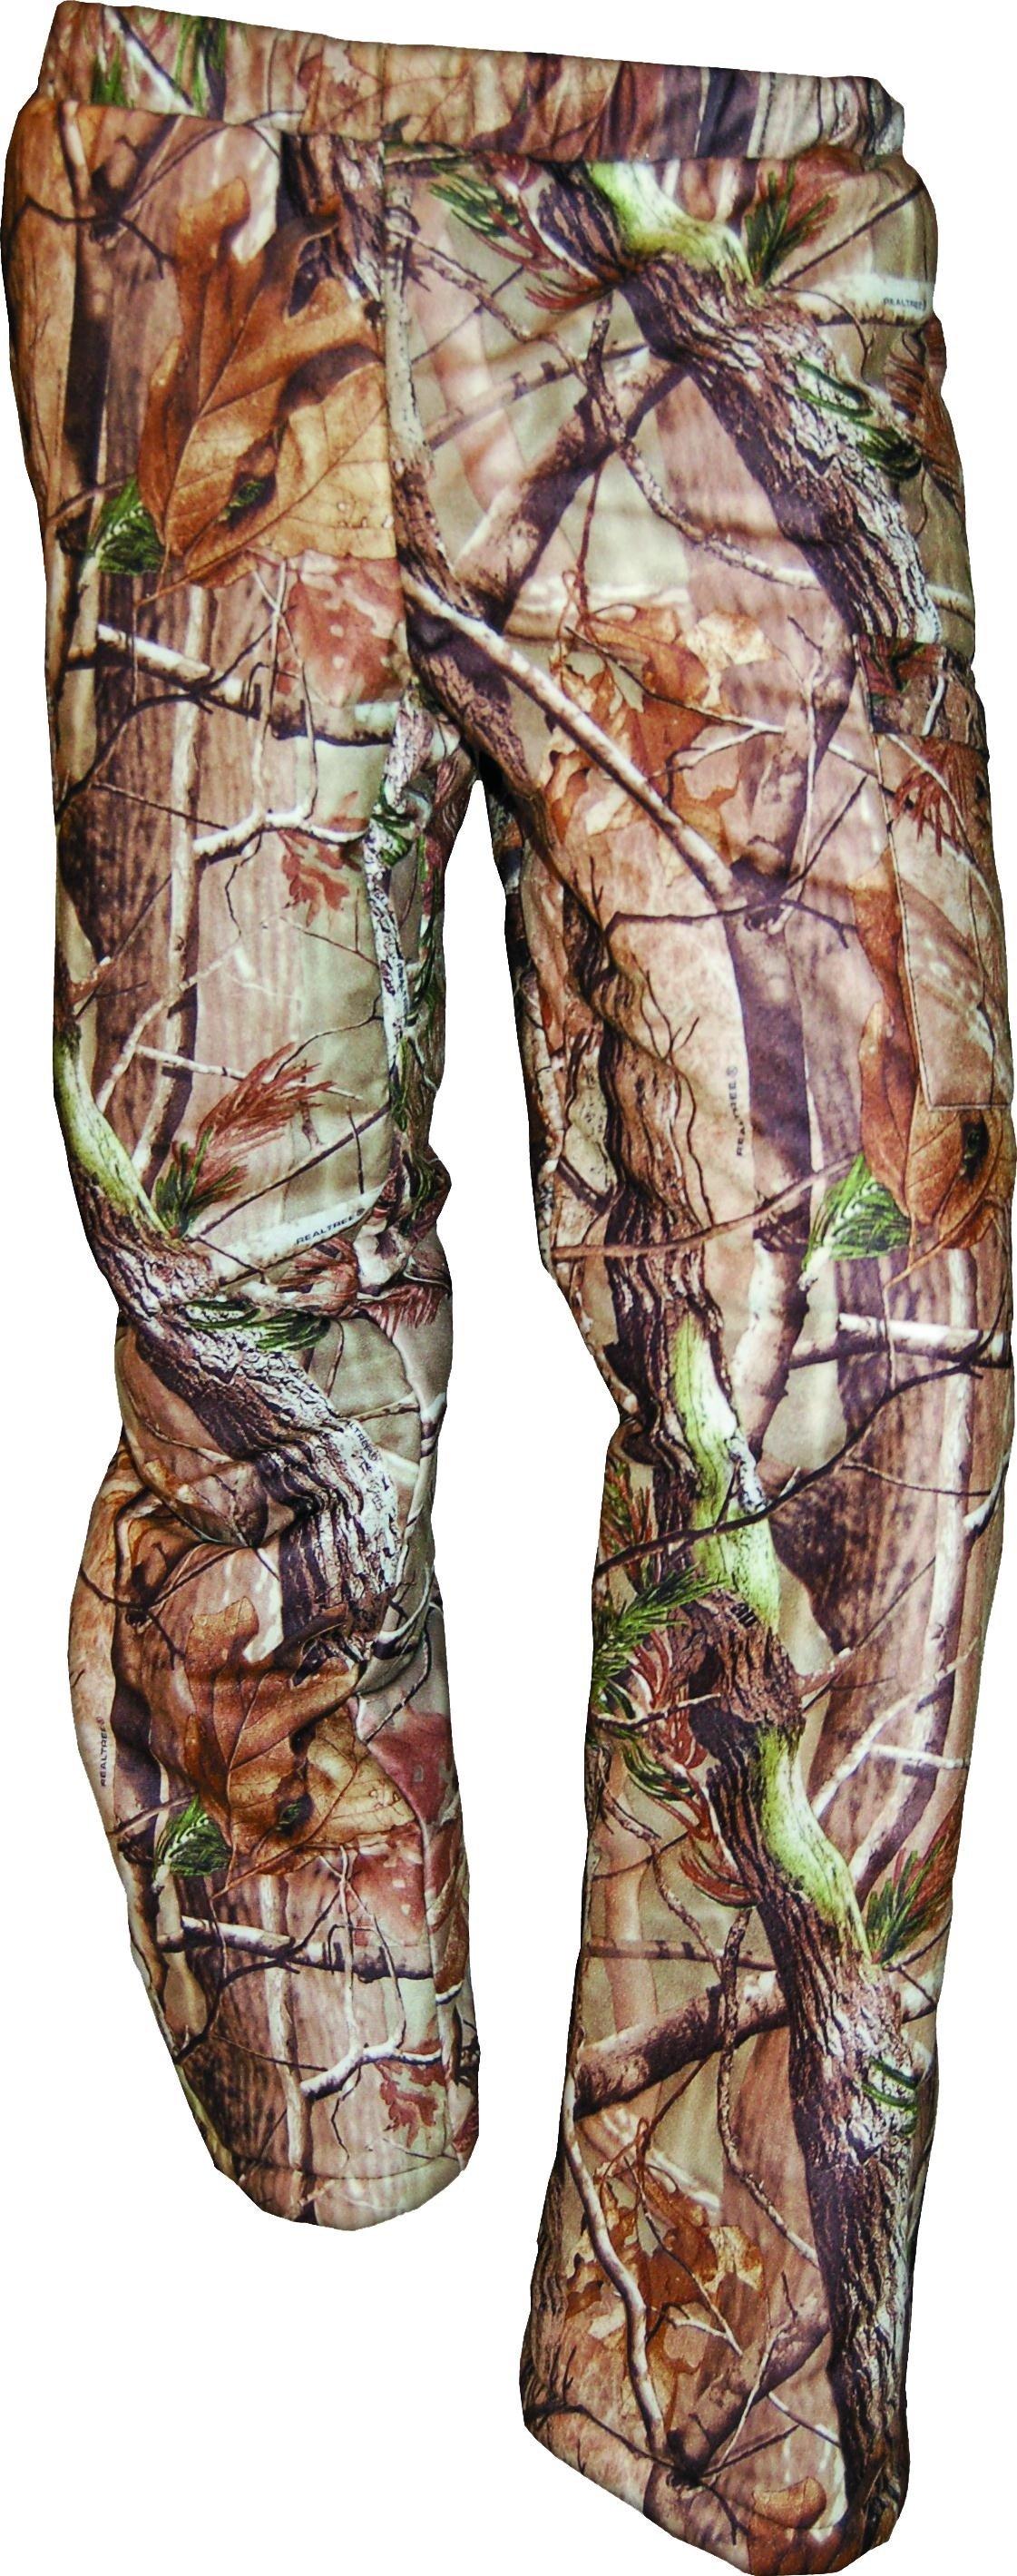 Prois Xtreme Insulated Pants in Realtree AP and MAX-1